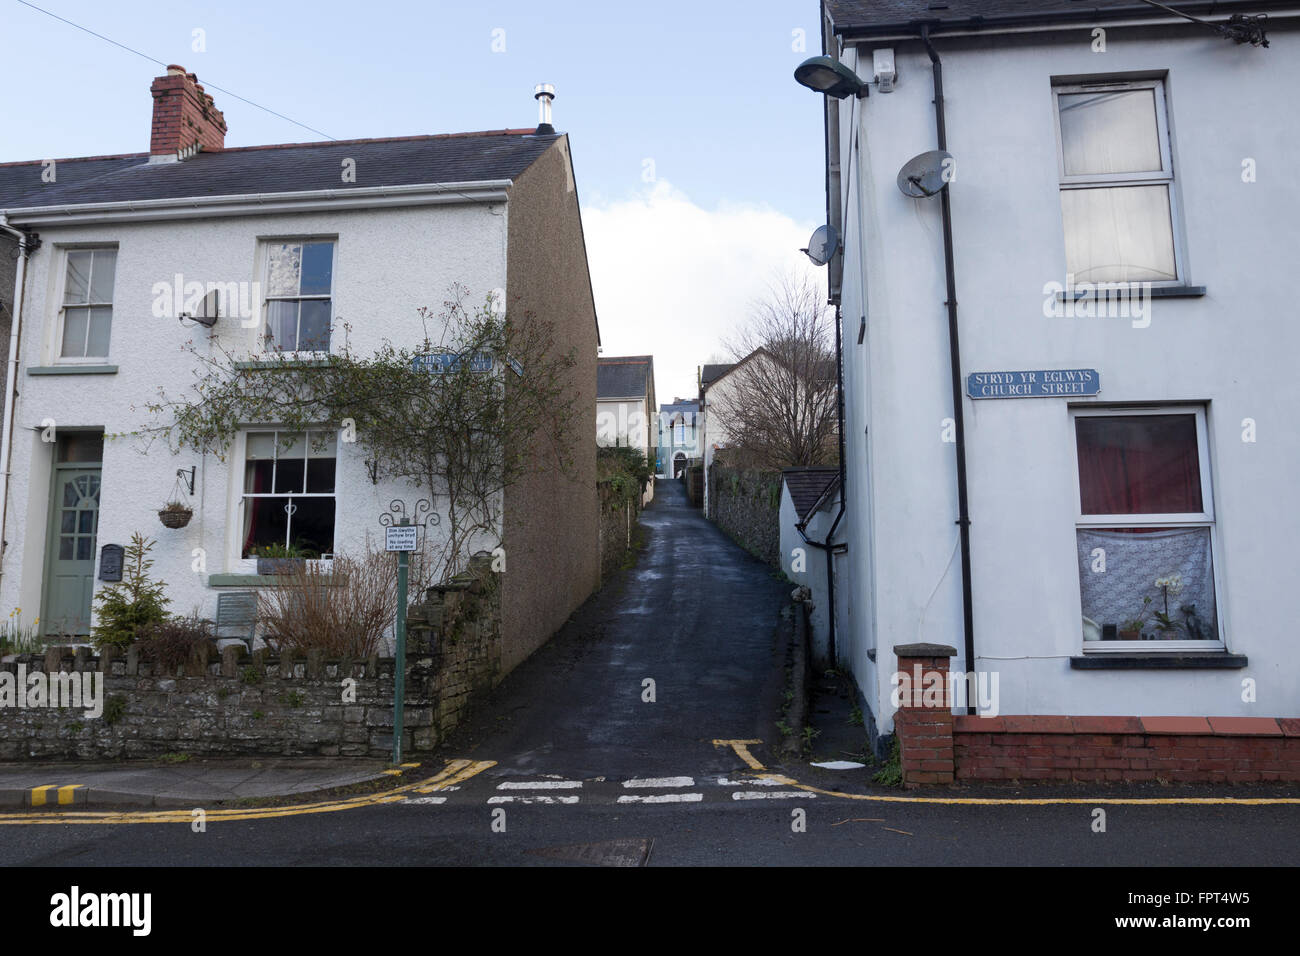 One of the many lanes in Llandysul, West Wales, that connect the three roads in town. Stock Photo